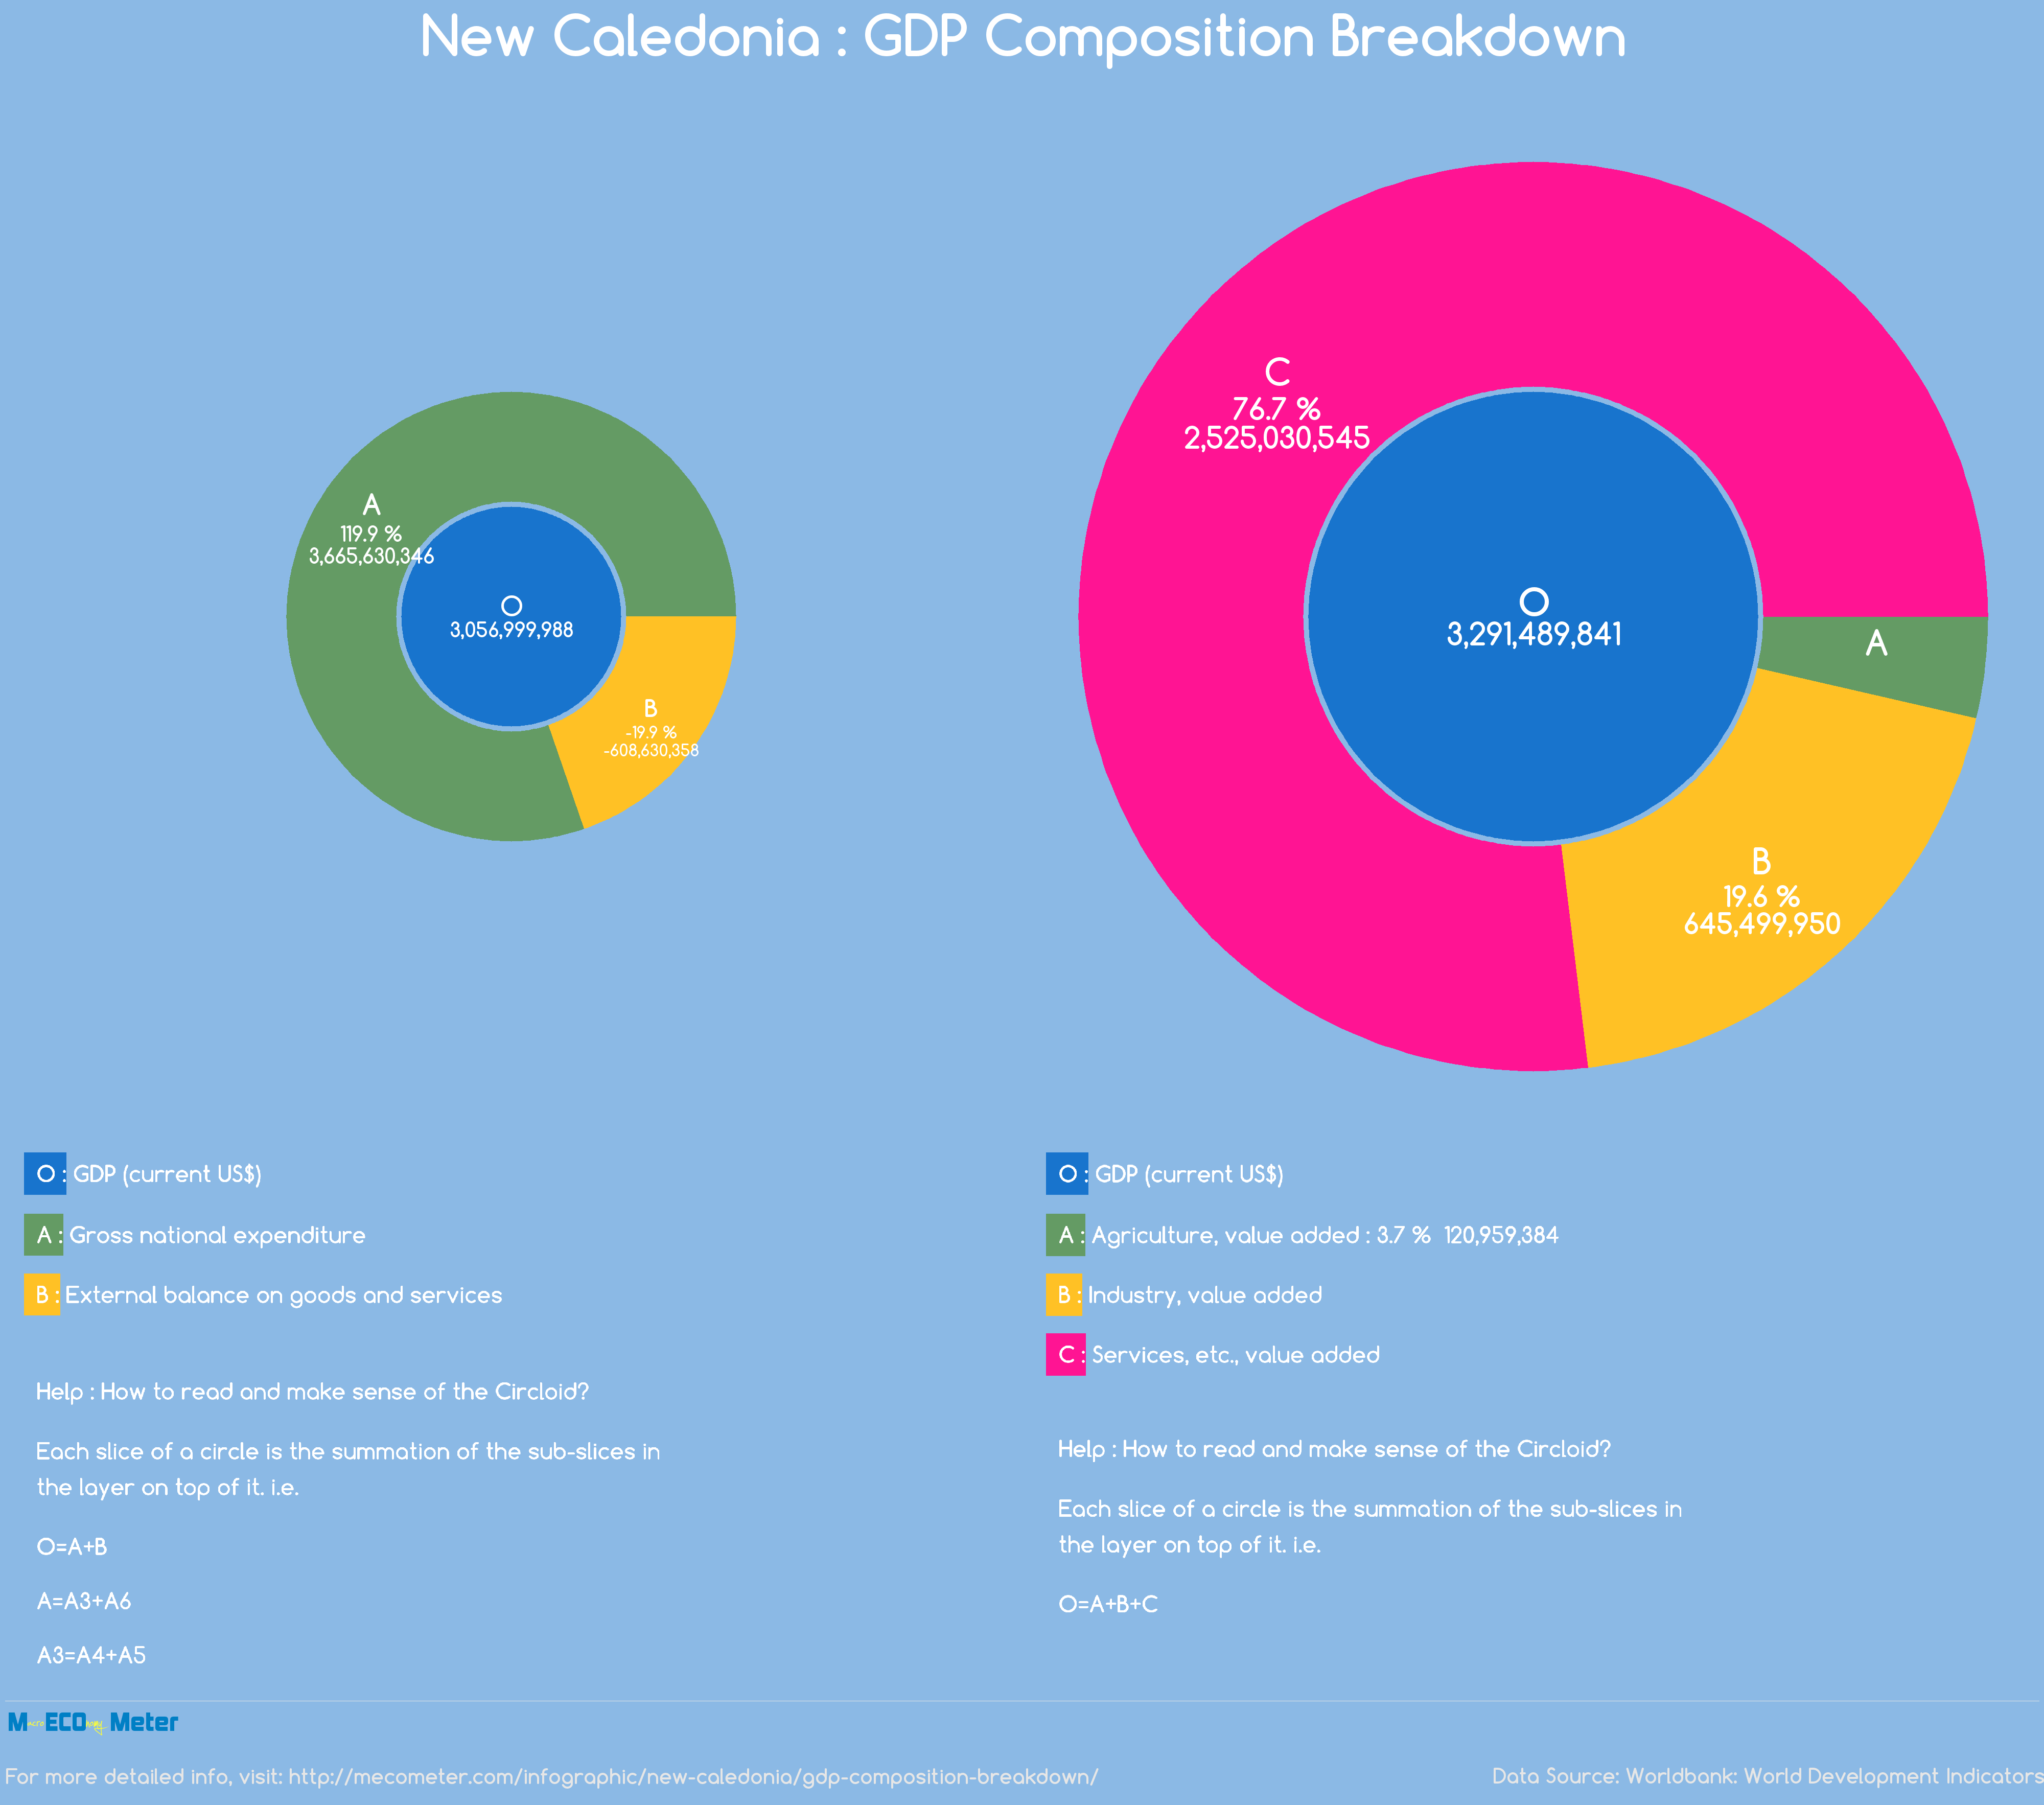 New Caledonia : GDP Composition Breakdown